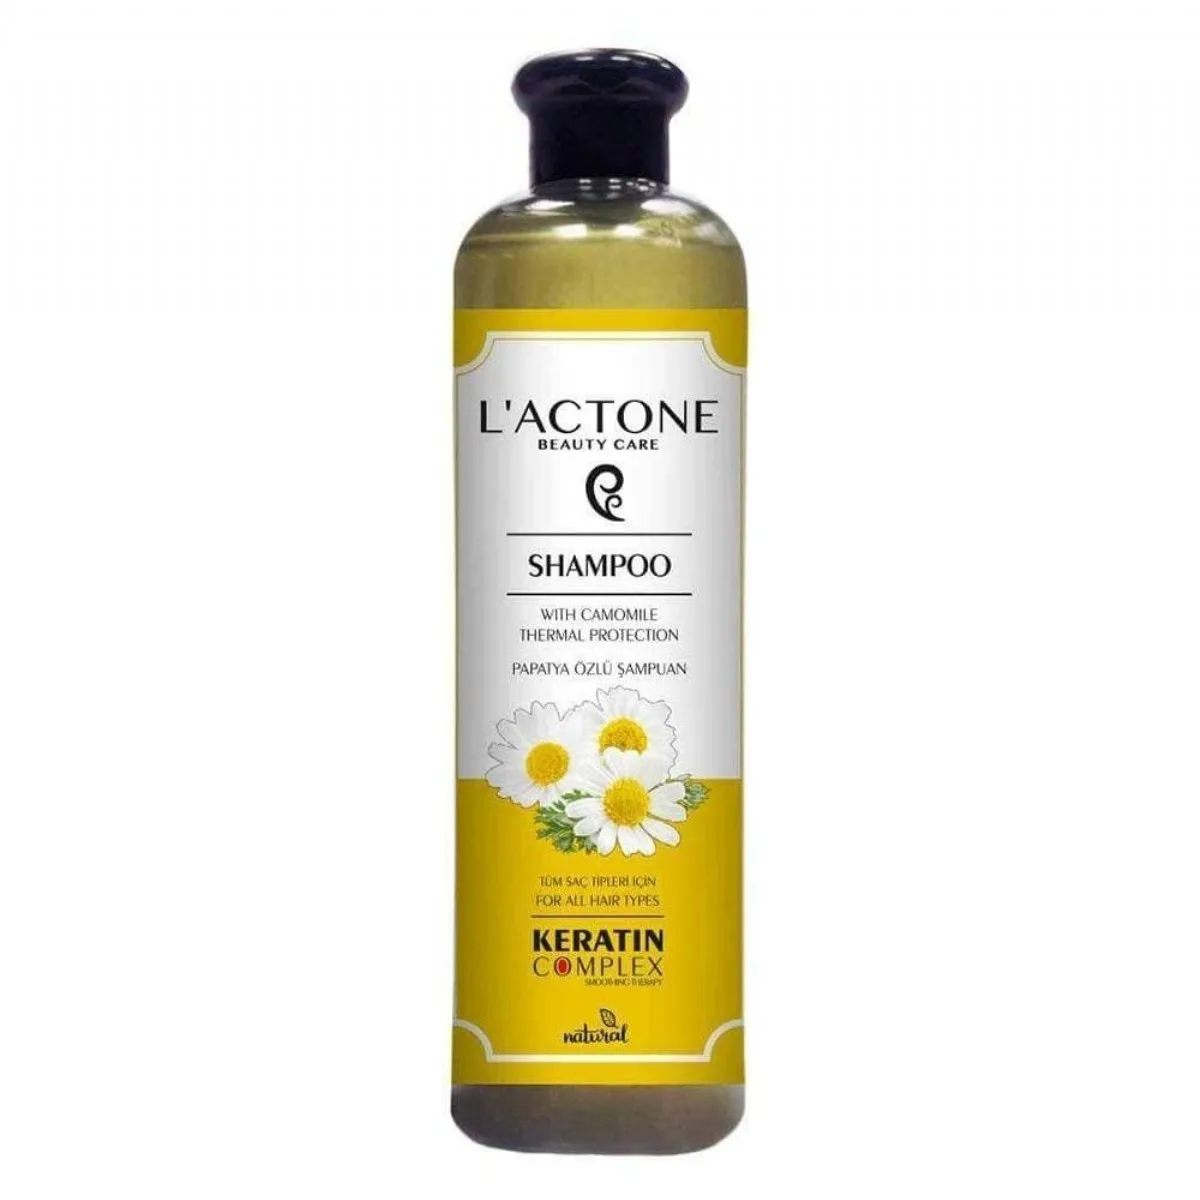 Lactone Shampoo 700ml Hair Care Turkey Manufacturer Wholesale Private Label  - Buy Hair Loss Shampoo Private Label,Shampoo Naturel Hair Care Hair  Traitment,Protein Keratin Hair Care Product on 